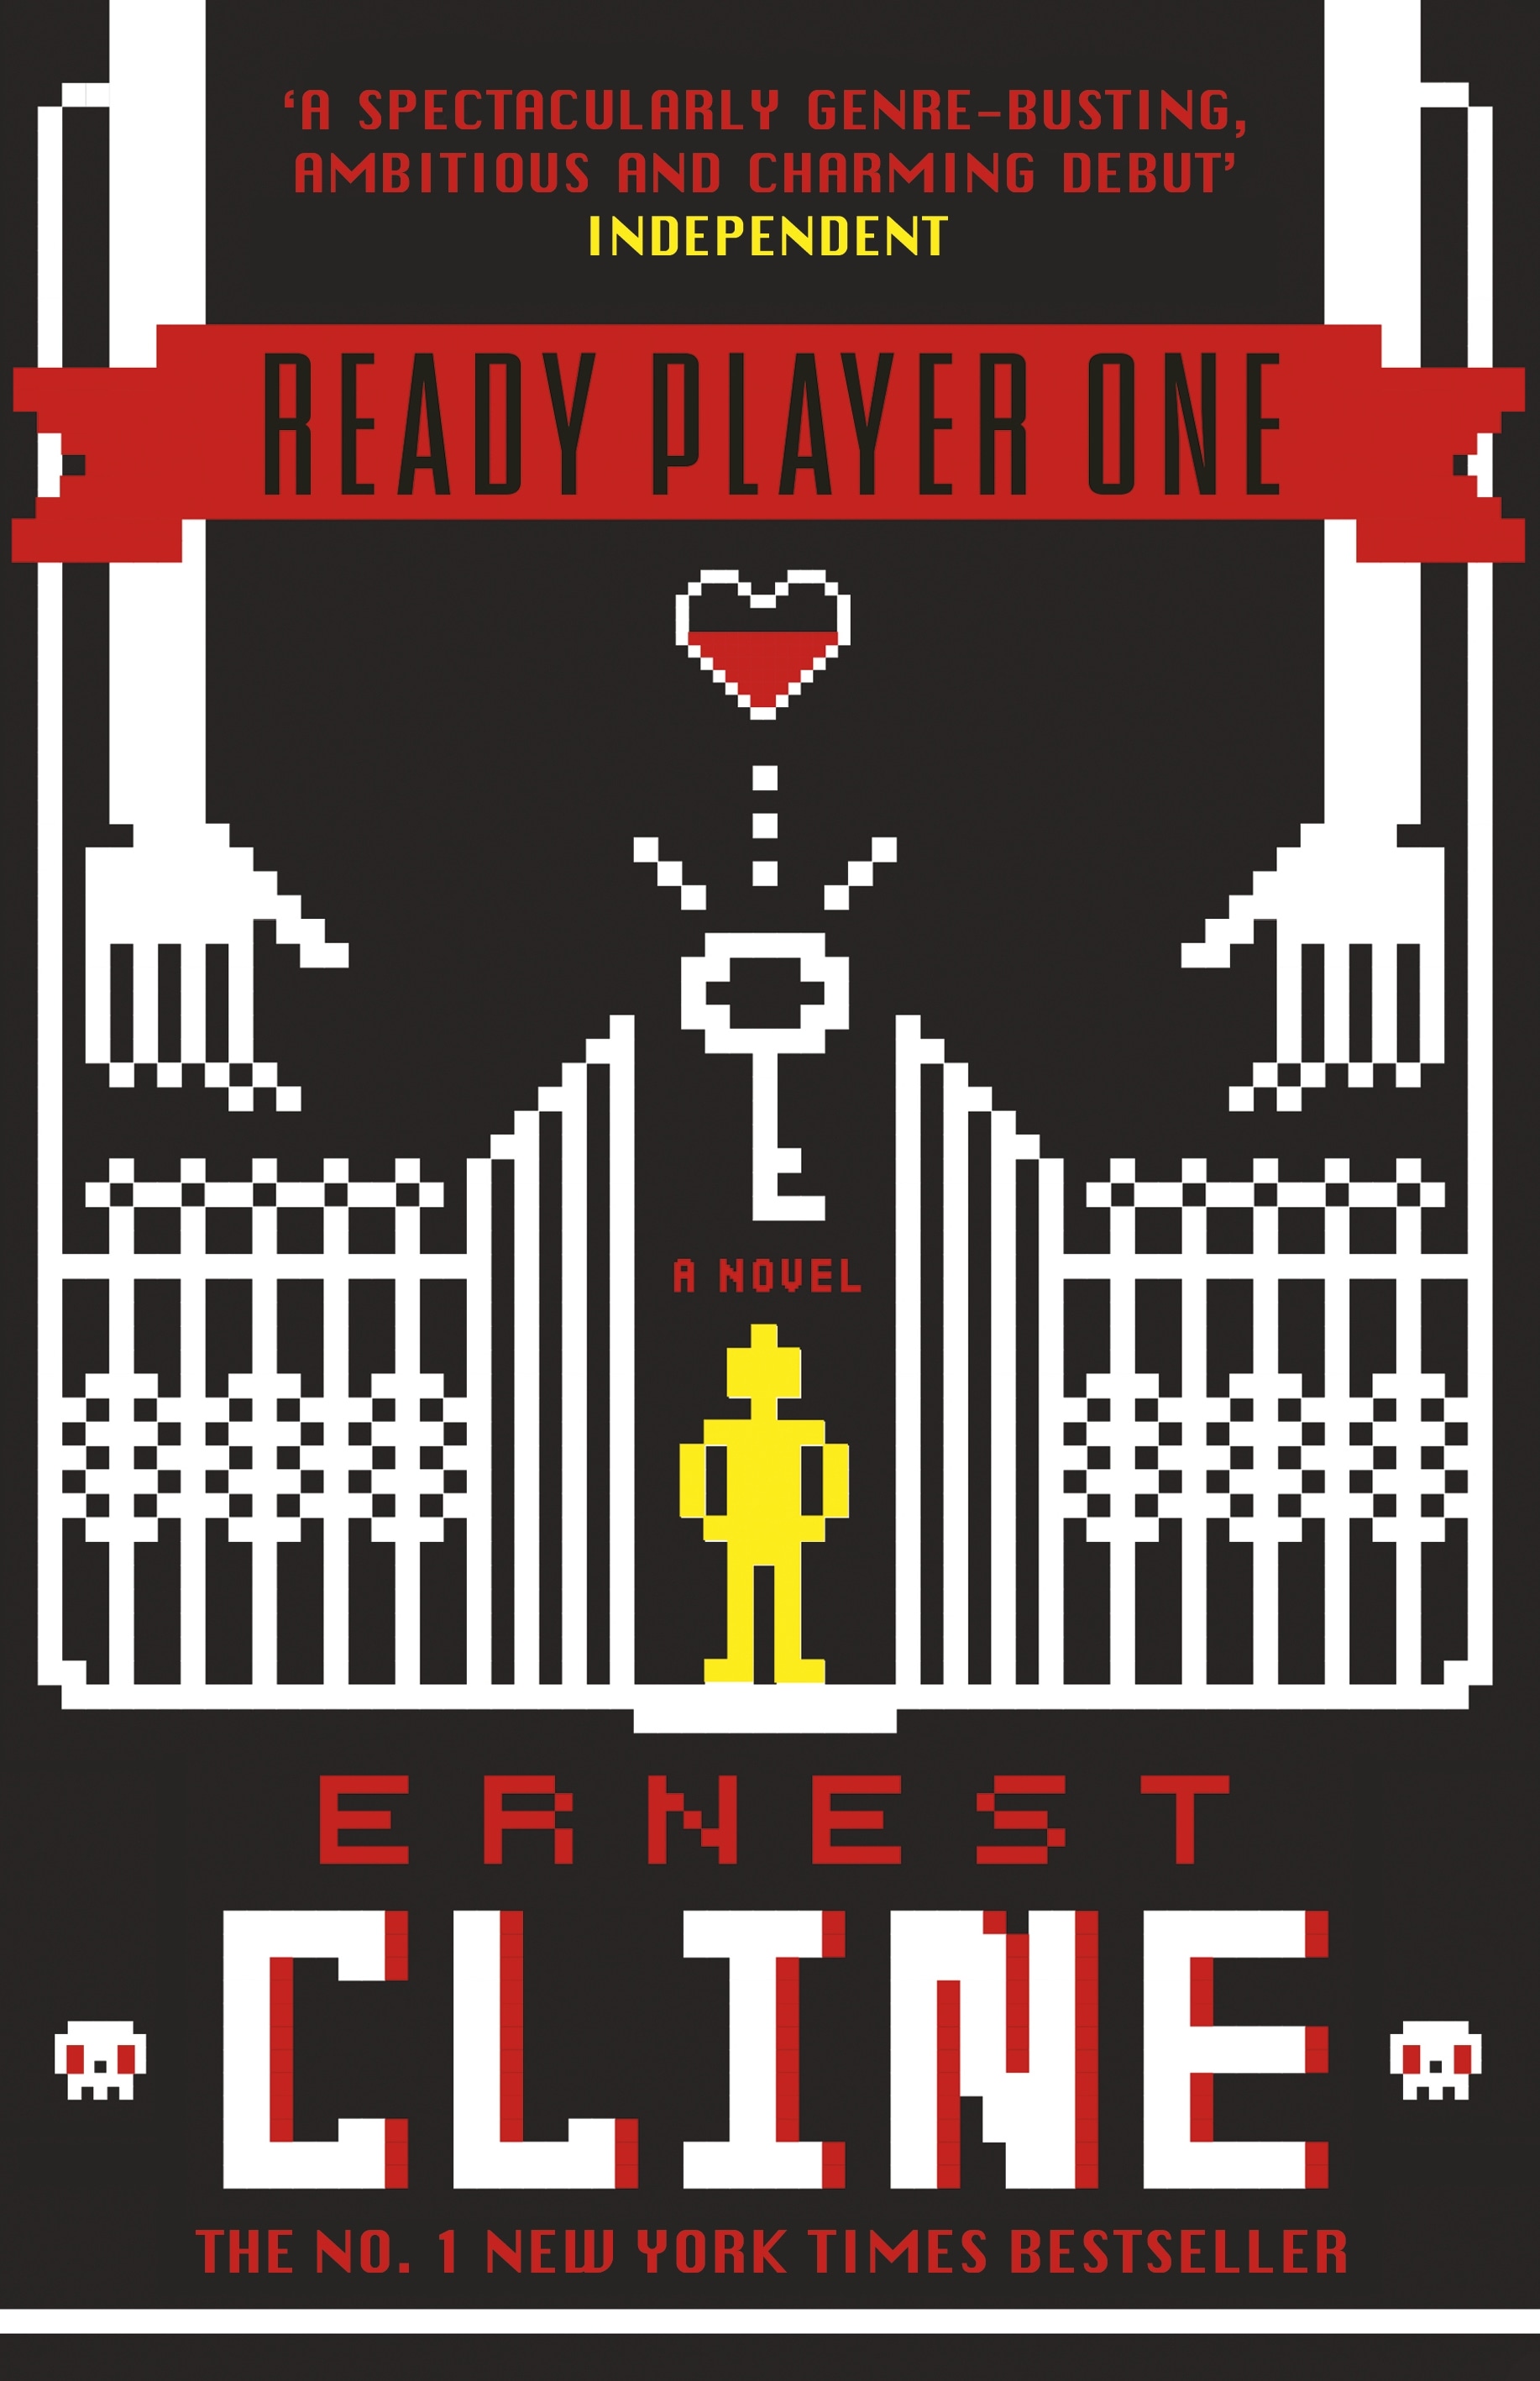 Book “Ready Player One” by Ernest Cline — October 1, 2020